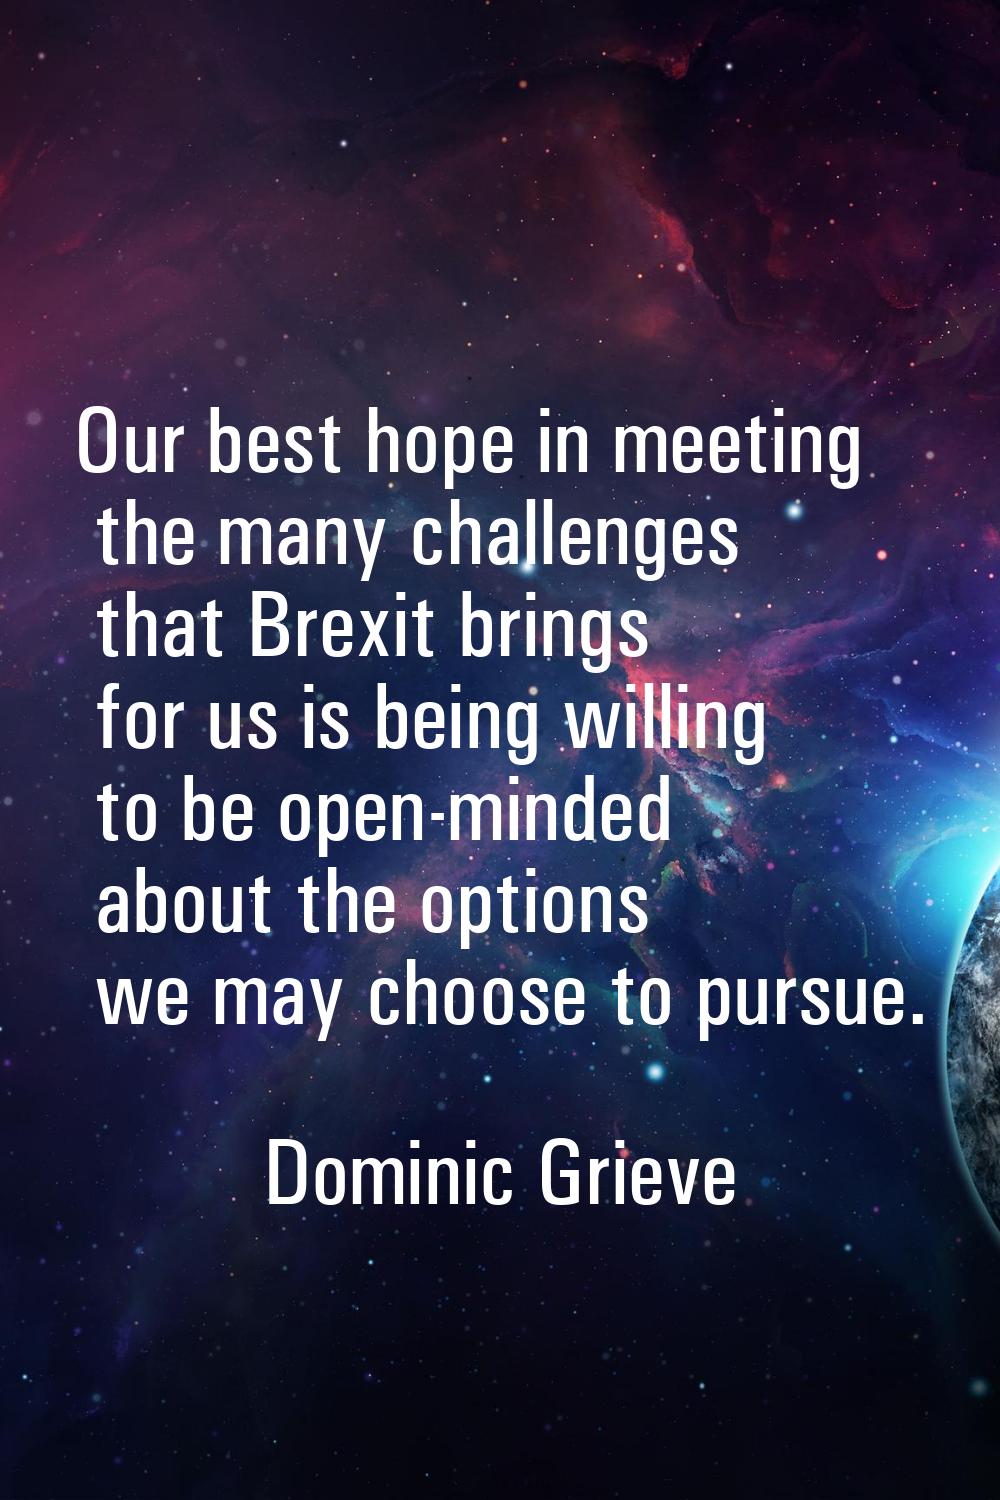 Our best hope in meeting the many challenges that Brexit brings for us is being willing to be open-